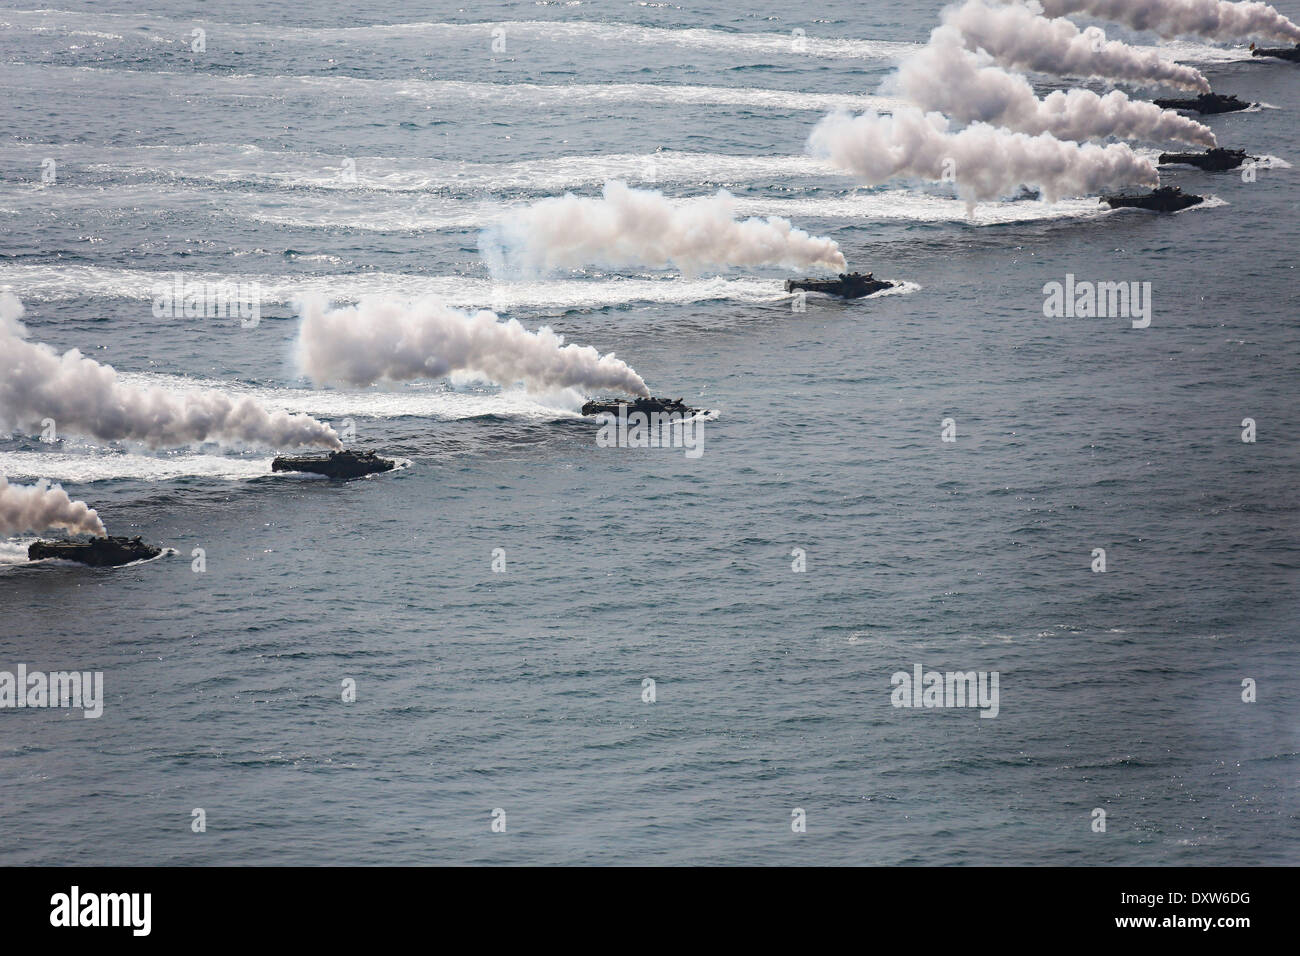 South Korean Marines amphibious assault vehicles approach the beach during a simulated amphibious assault part of joint training exercise Ssang Yong March 31, 2014 in Doksu-Ri, Pohang, South Korea. Stock Photo